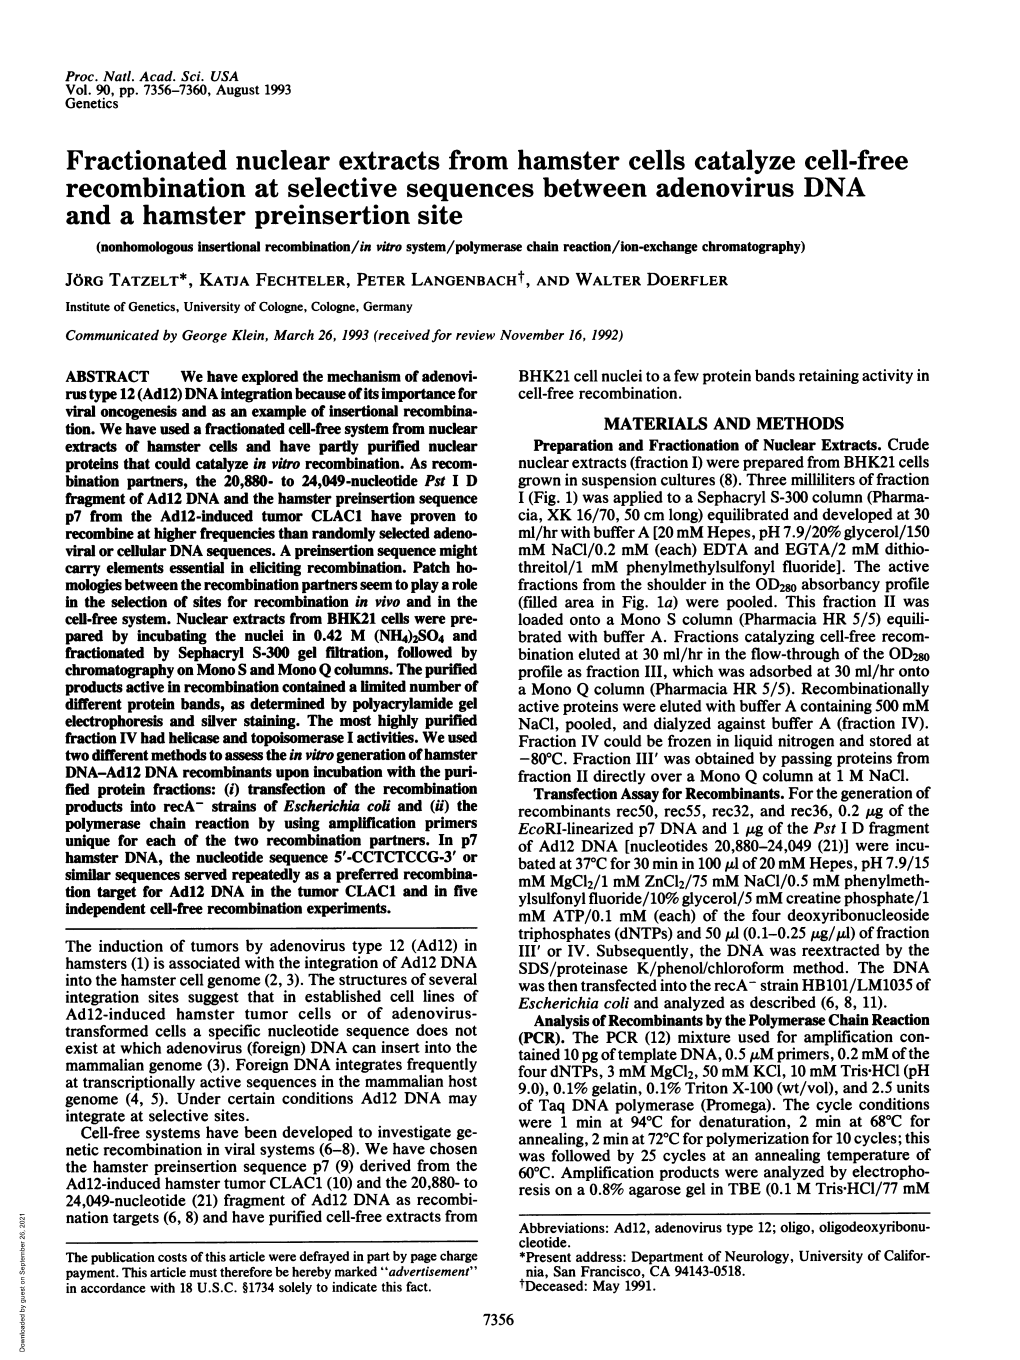 Recombination at Selective Sequences Between Adenovirus DNA and A